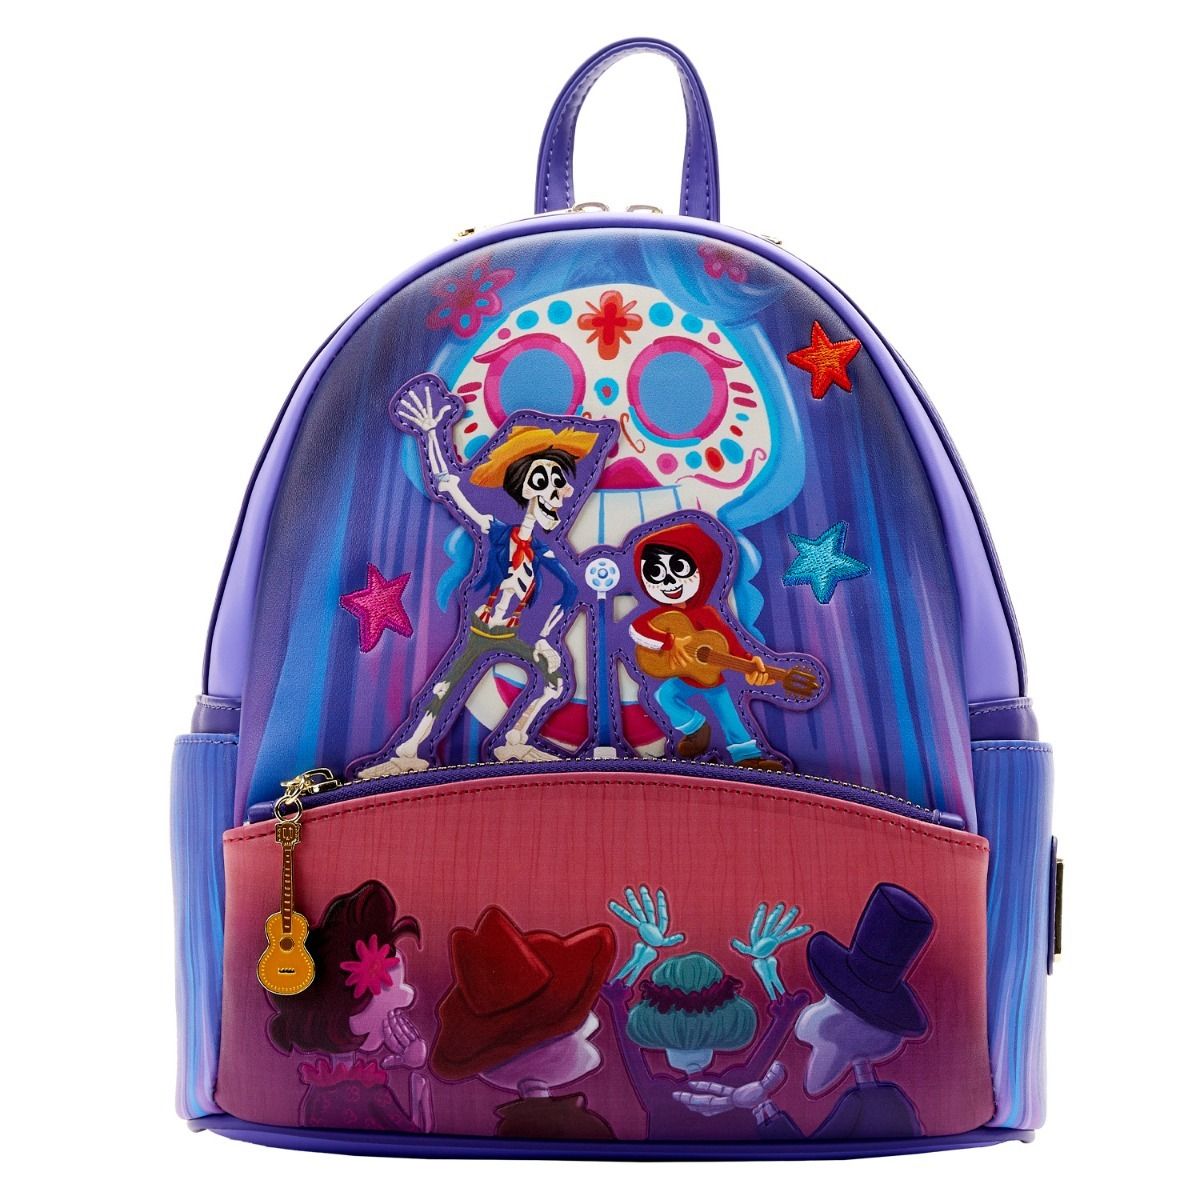 Buy Your Coco Loungefly Backpack (Free Shipping) - Pixar